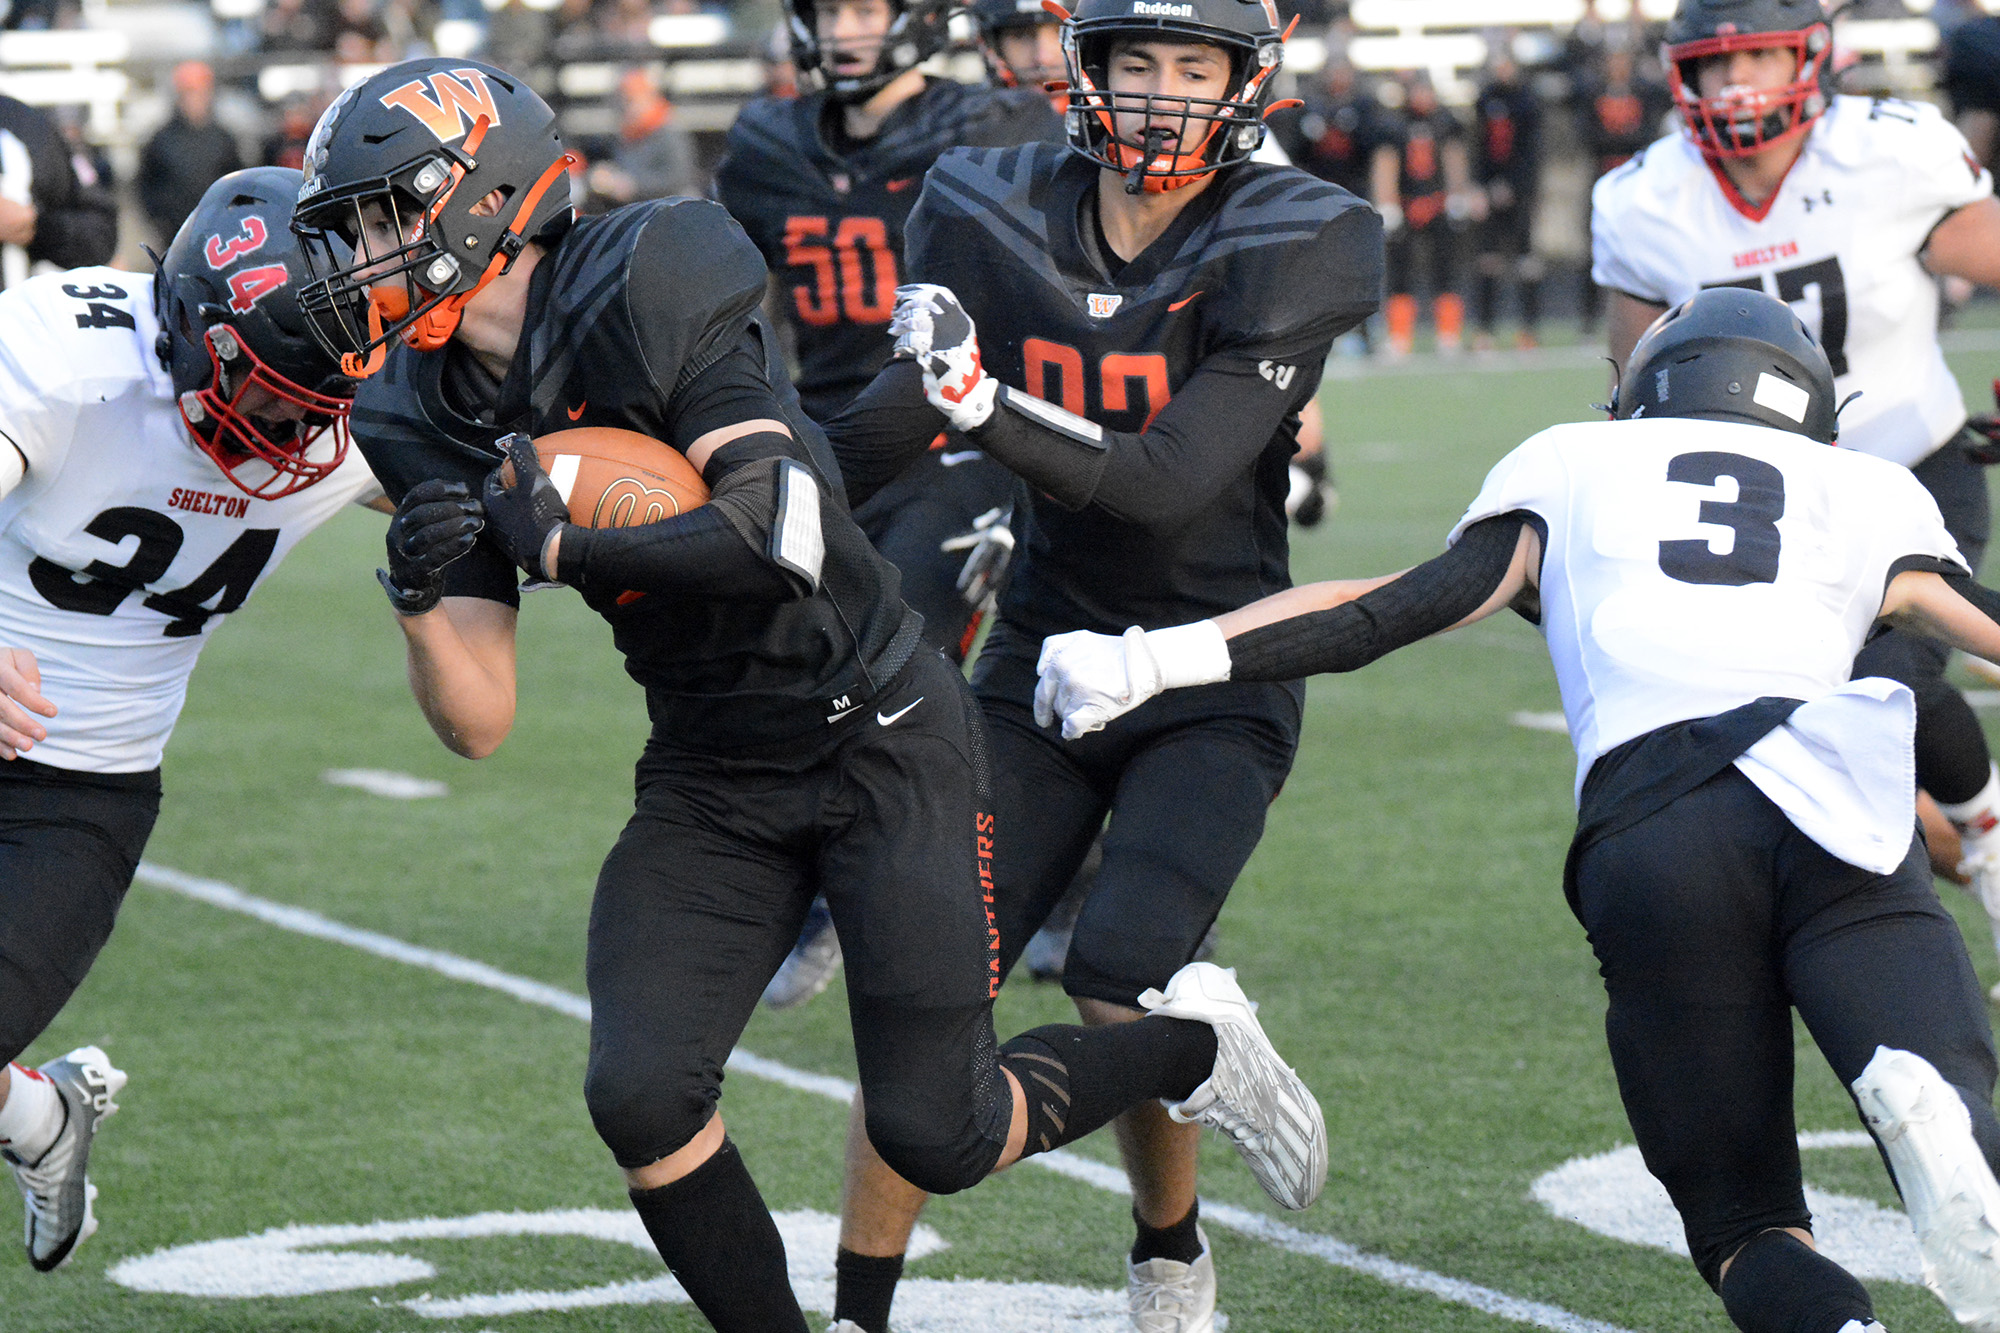 Washougal's Liam Atkin runs with the ball during the Panthers' 38-34 over Shelton in a 2A district playoff in Washougal on Saturday, Nov. 5, 2022.